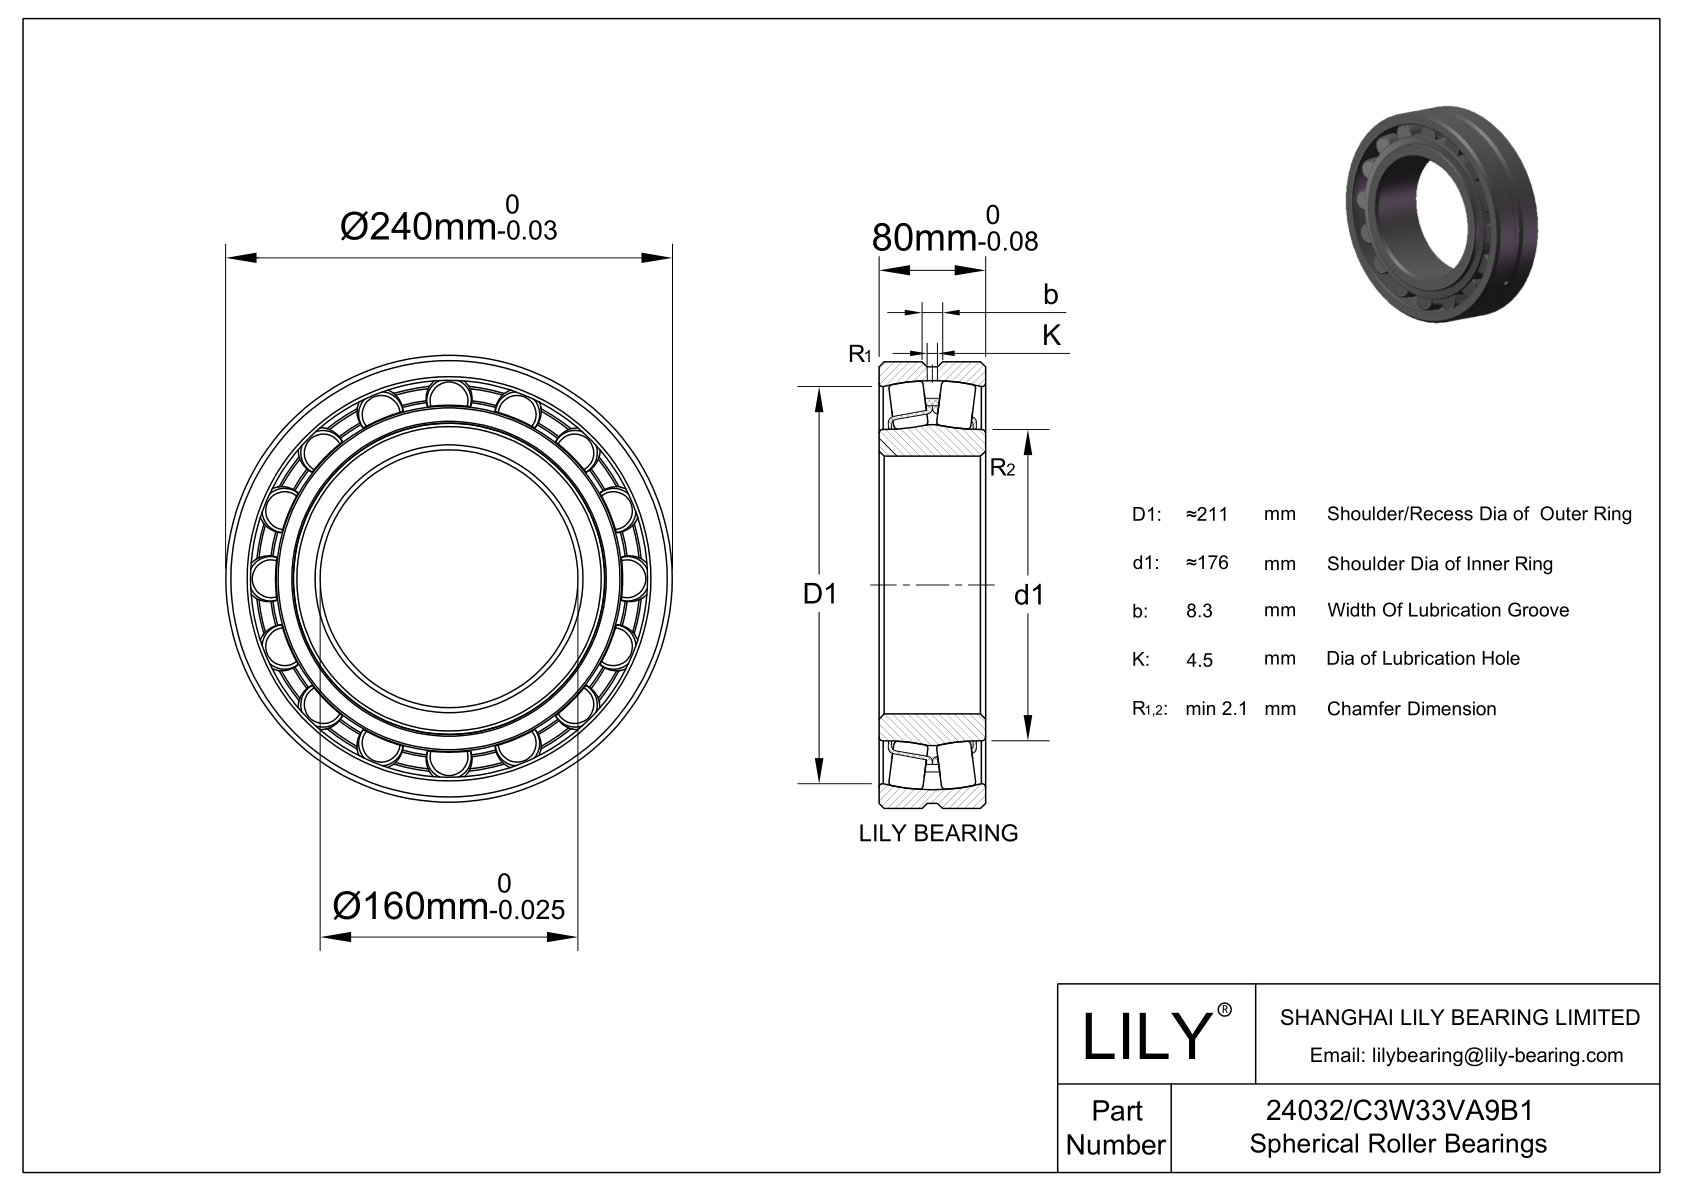 24032/C3W33VA9B1 Double Row Spherical Roller Bearing cad drawing